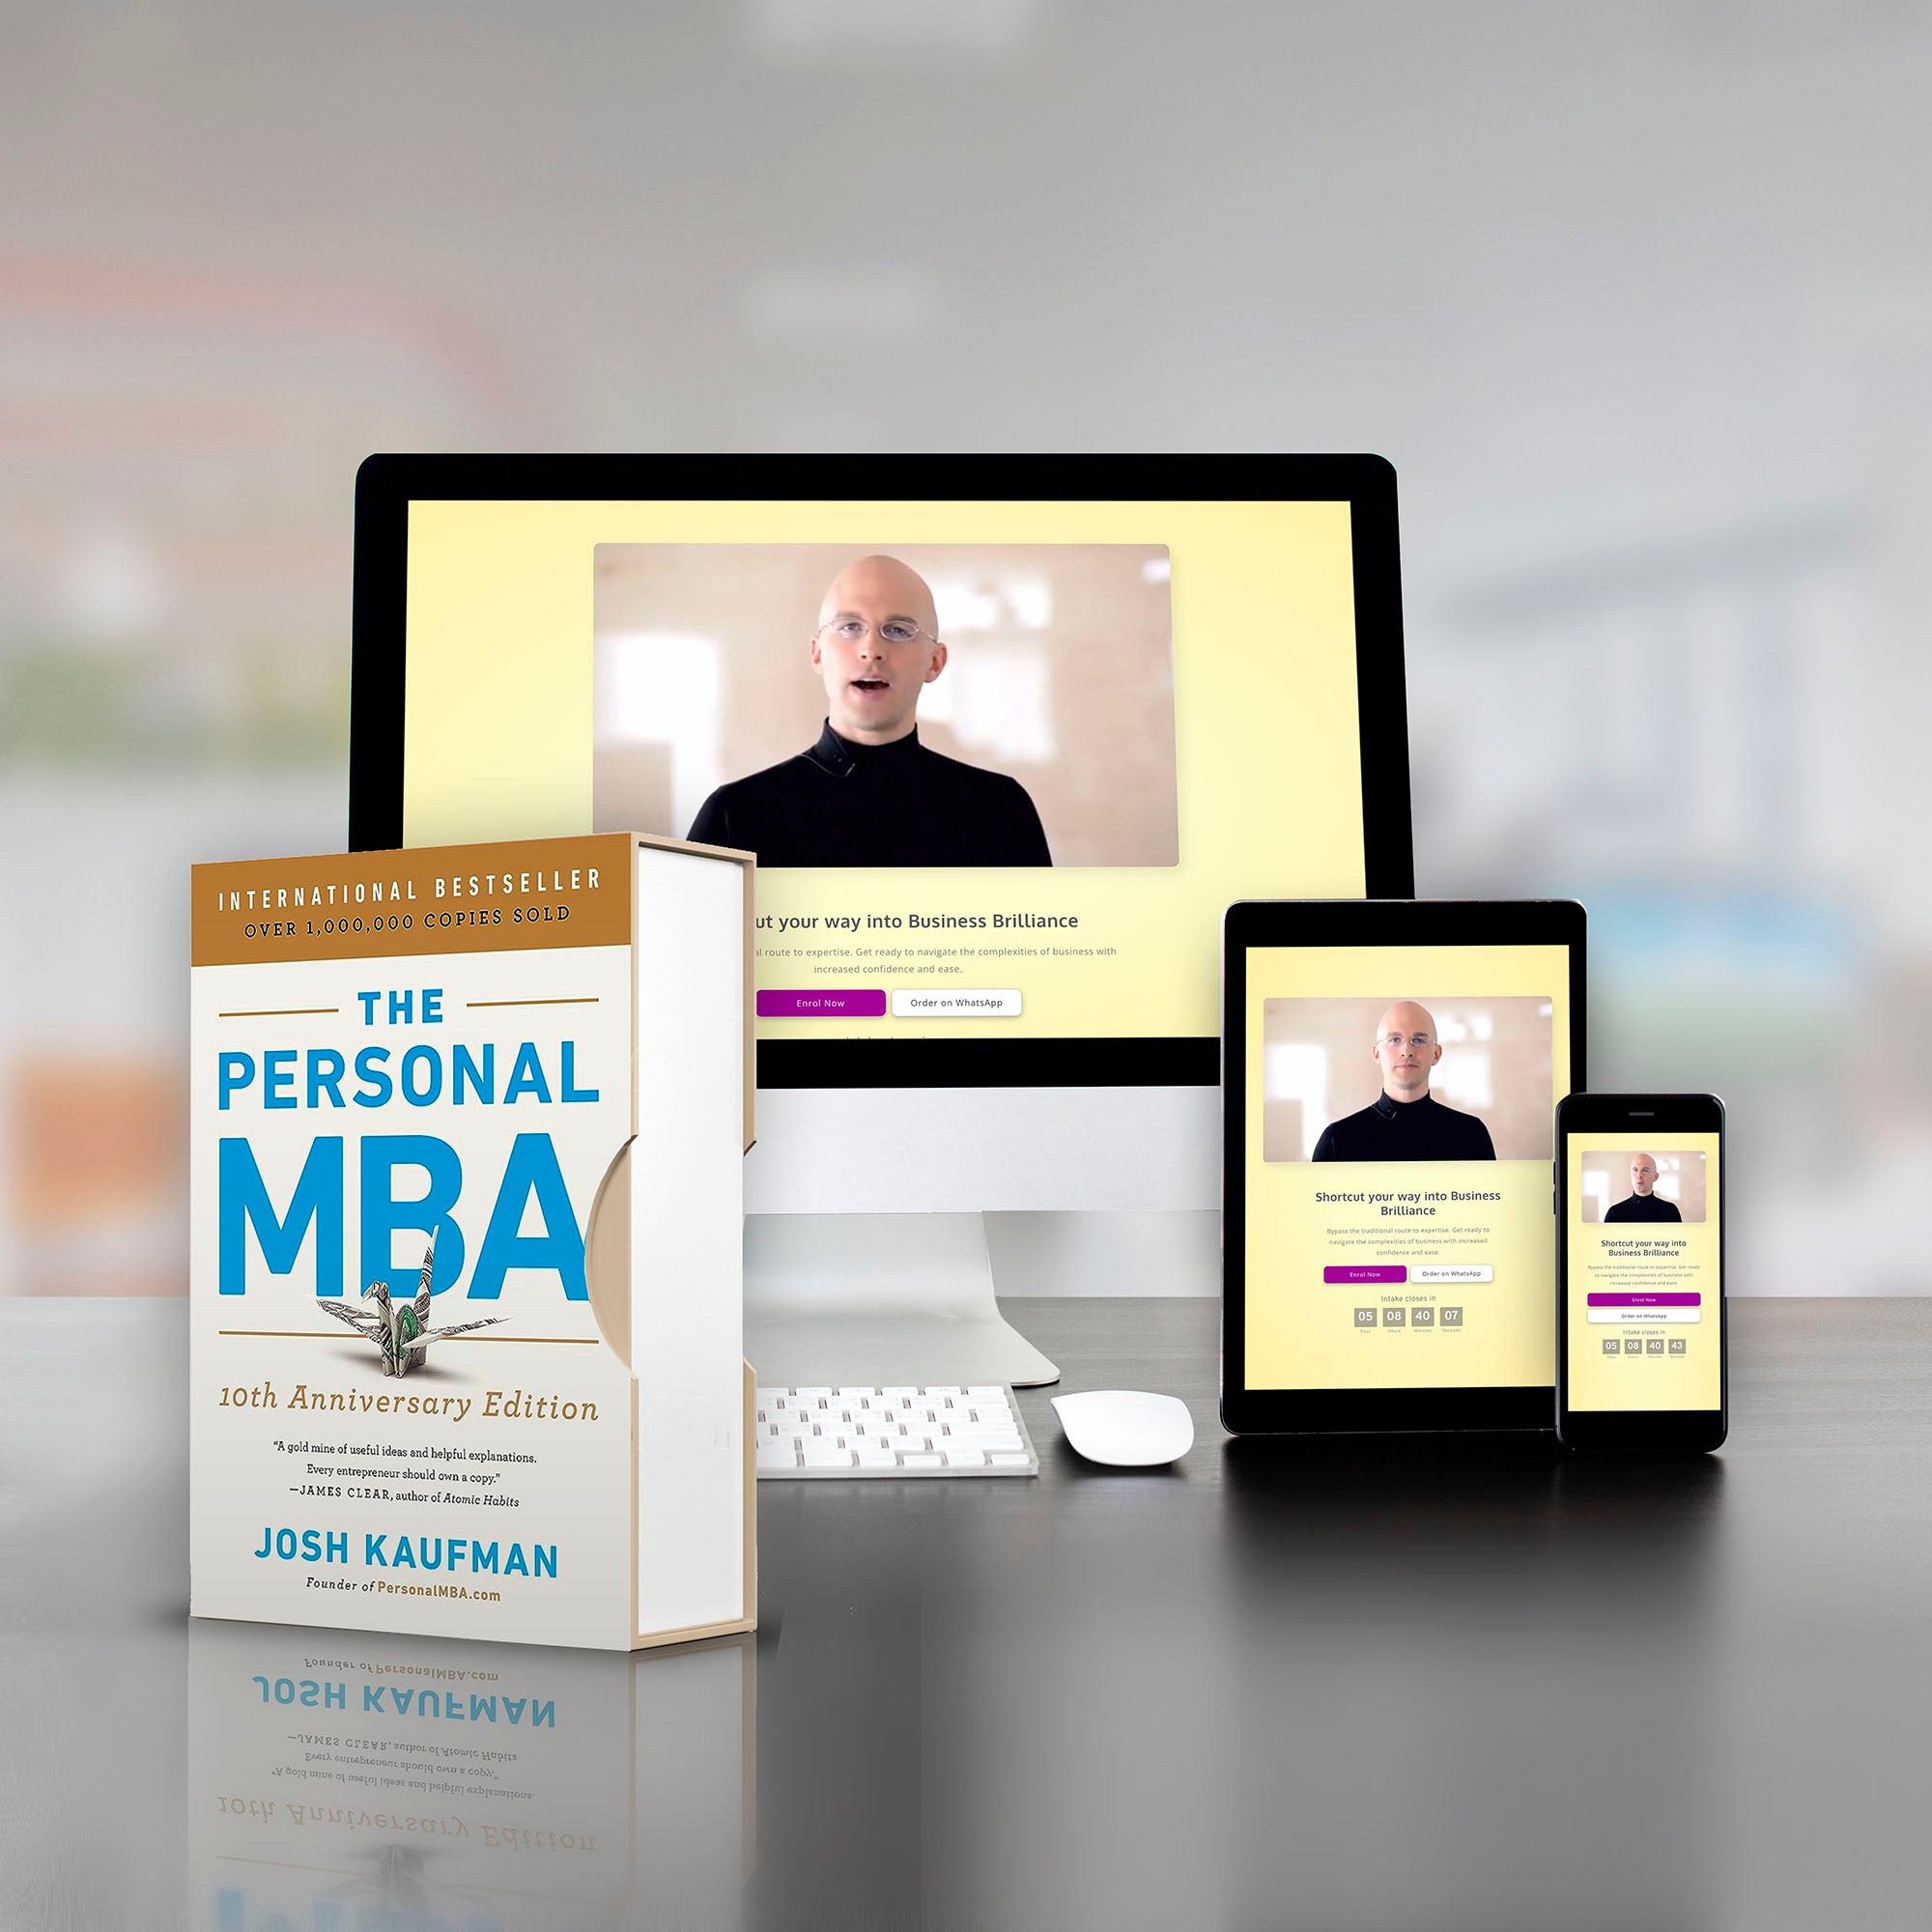 MBA PERSONAL